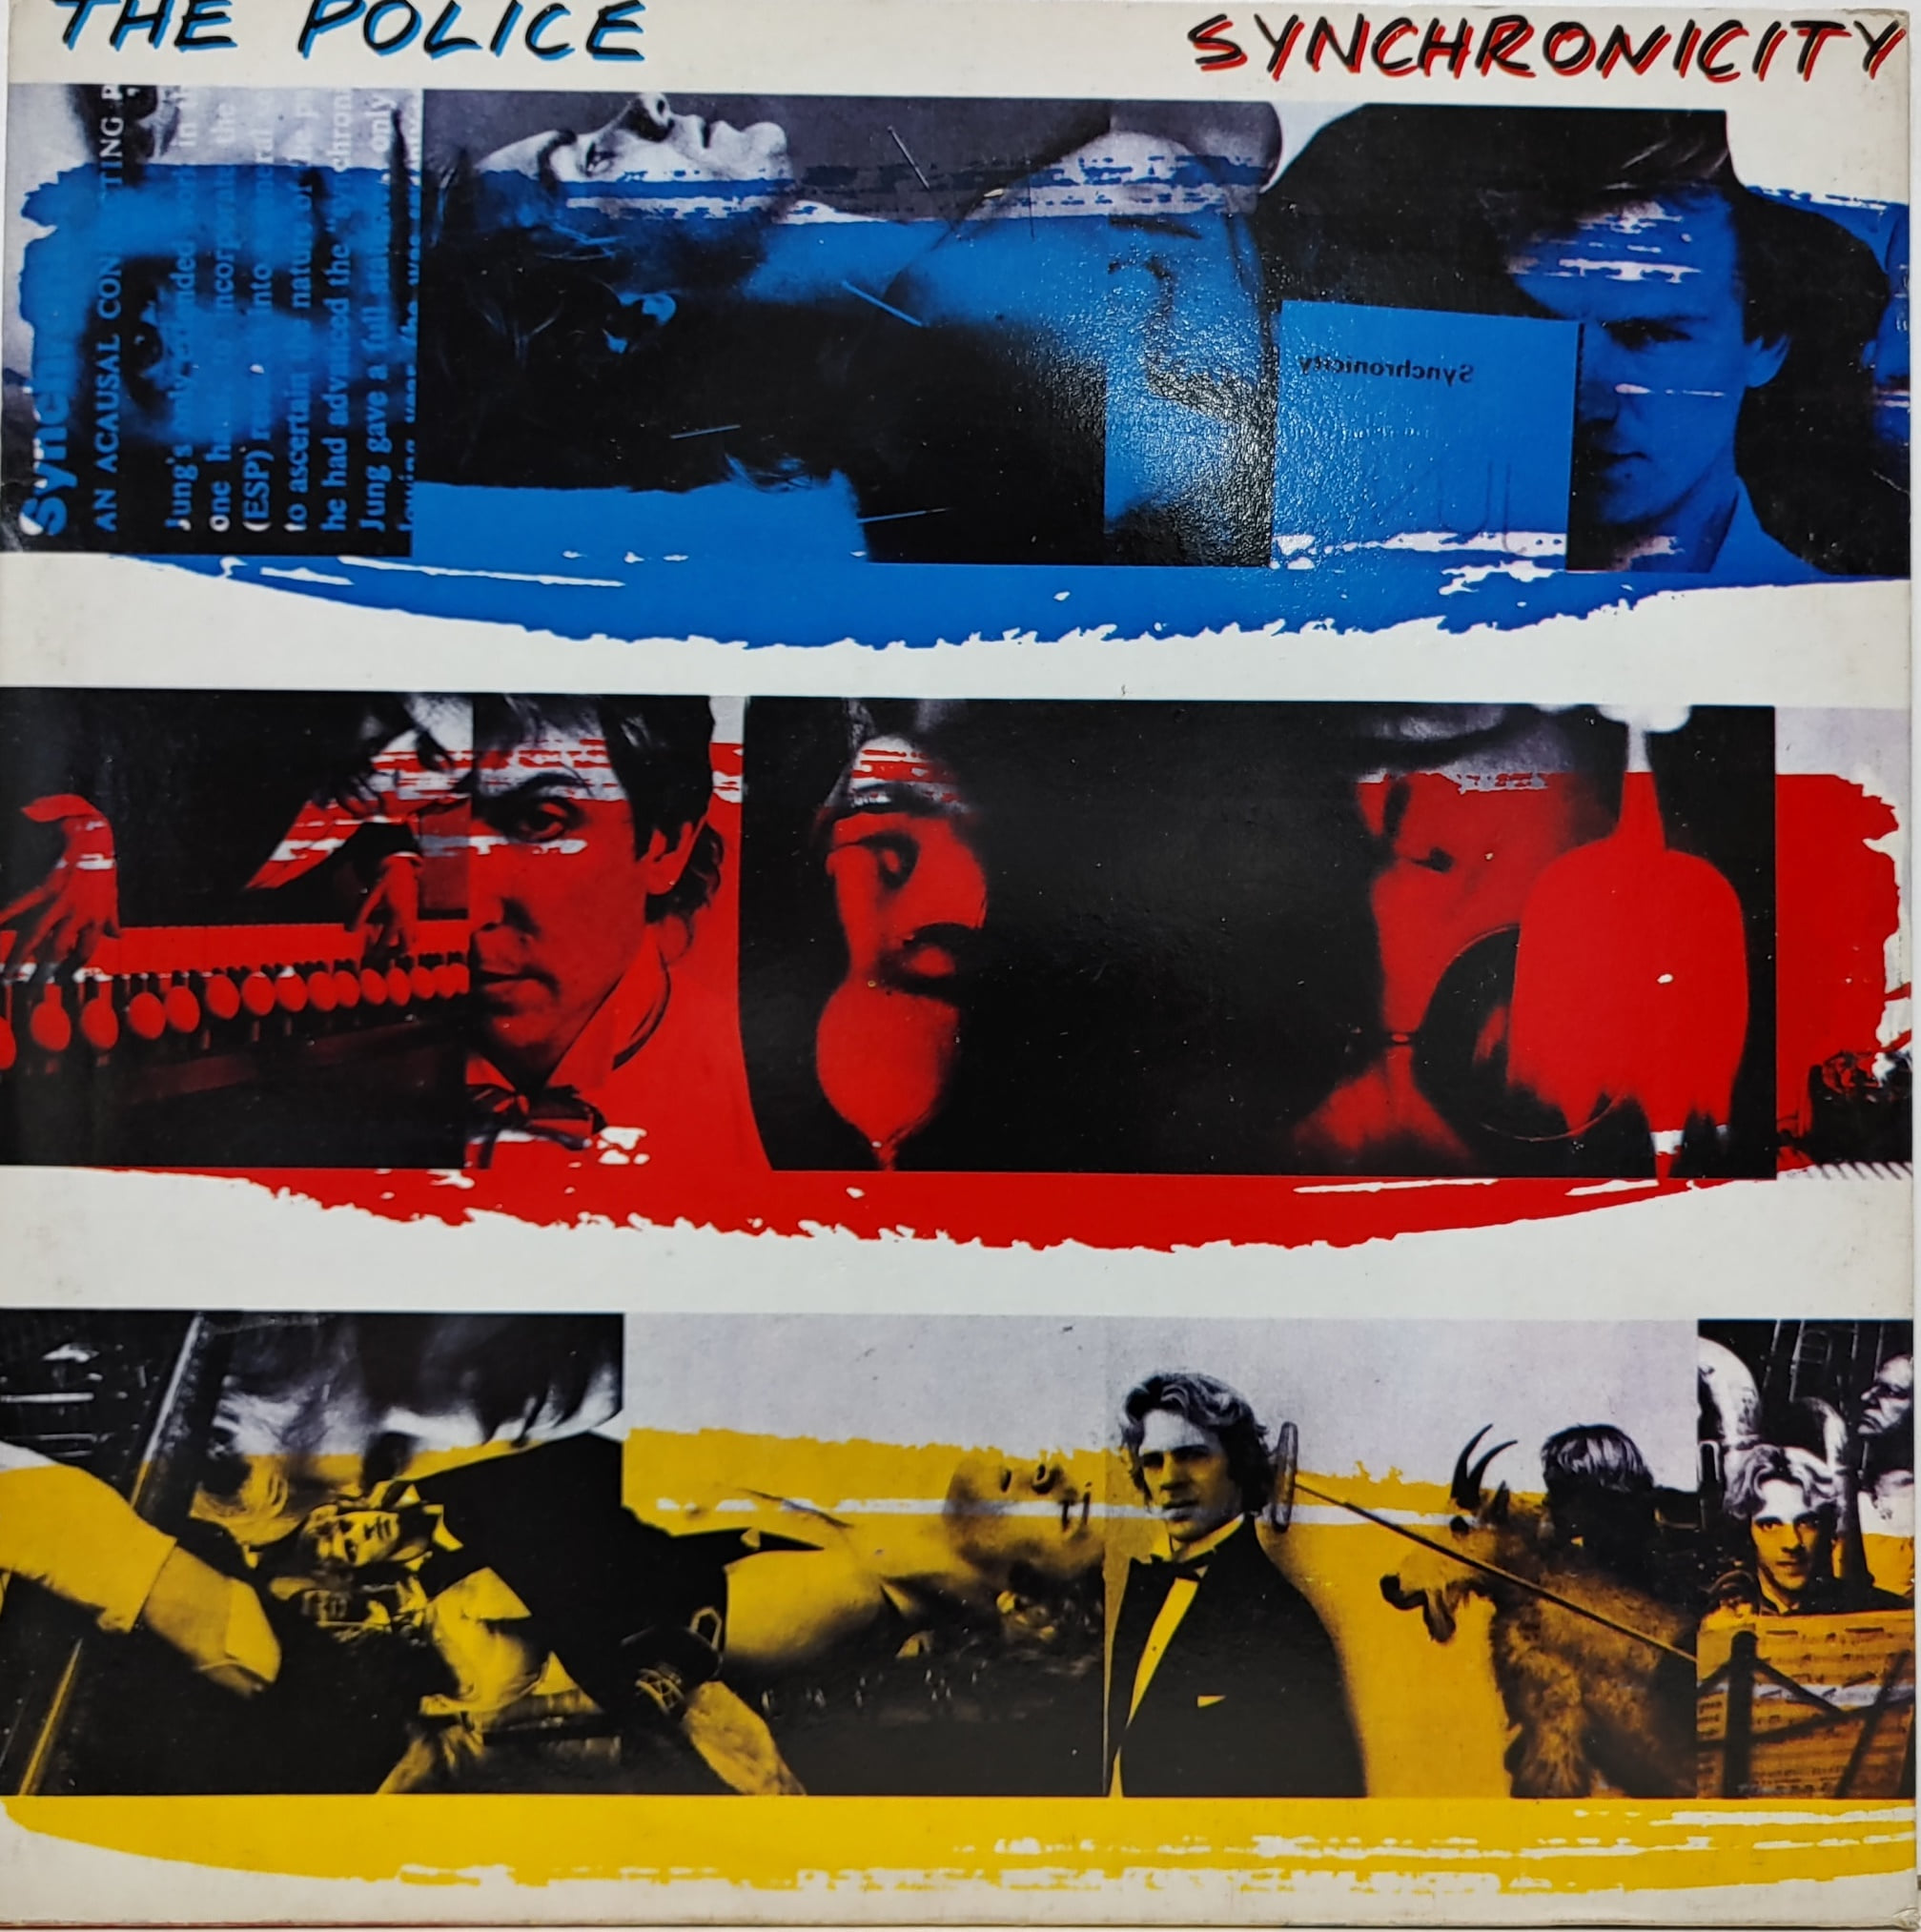 THE POLICE / SYNCHRONICITY